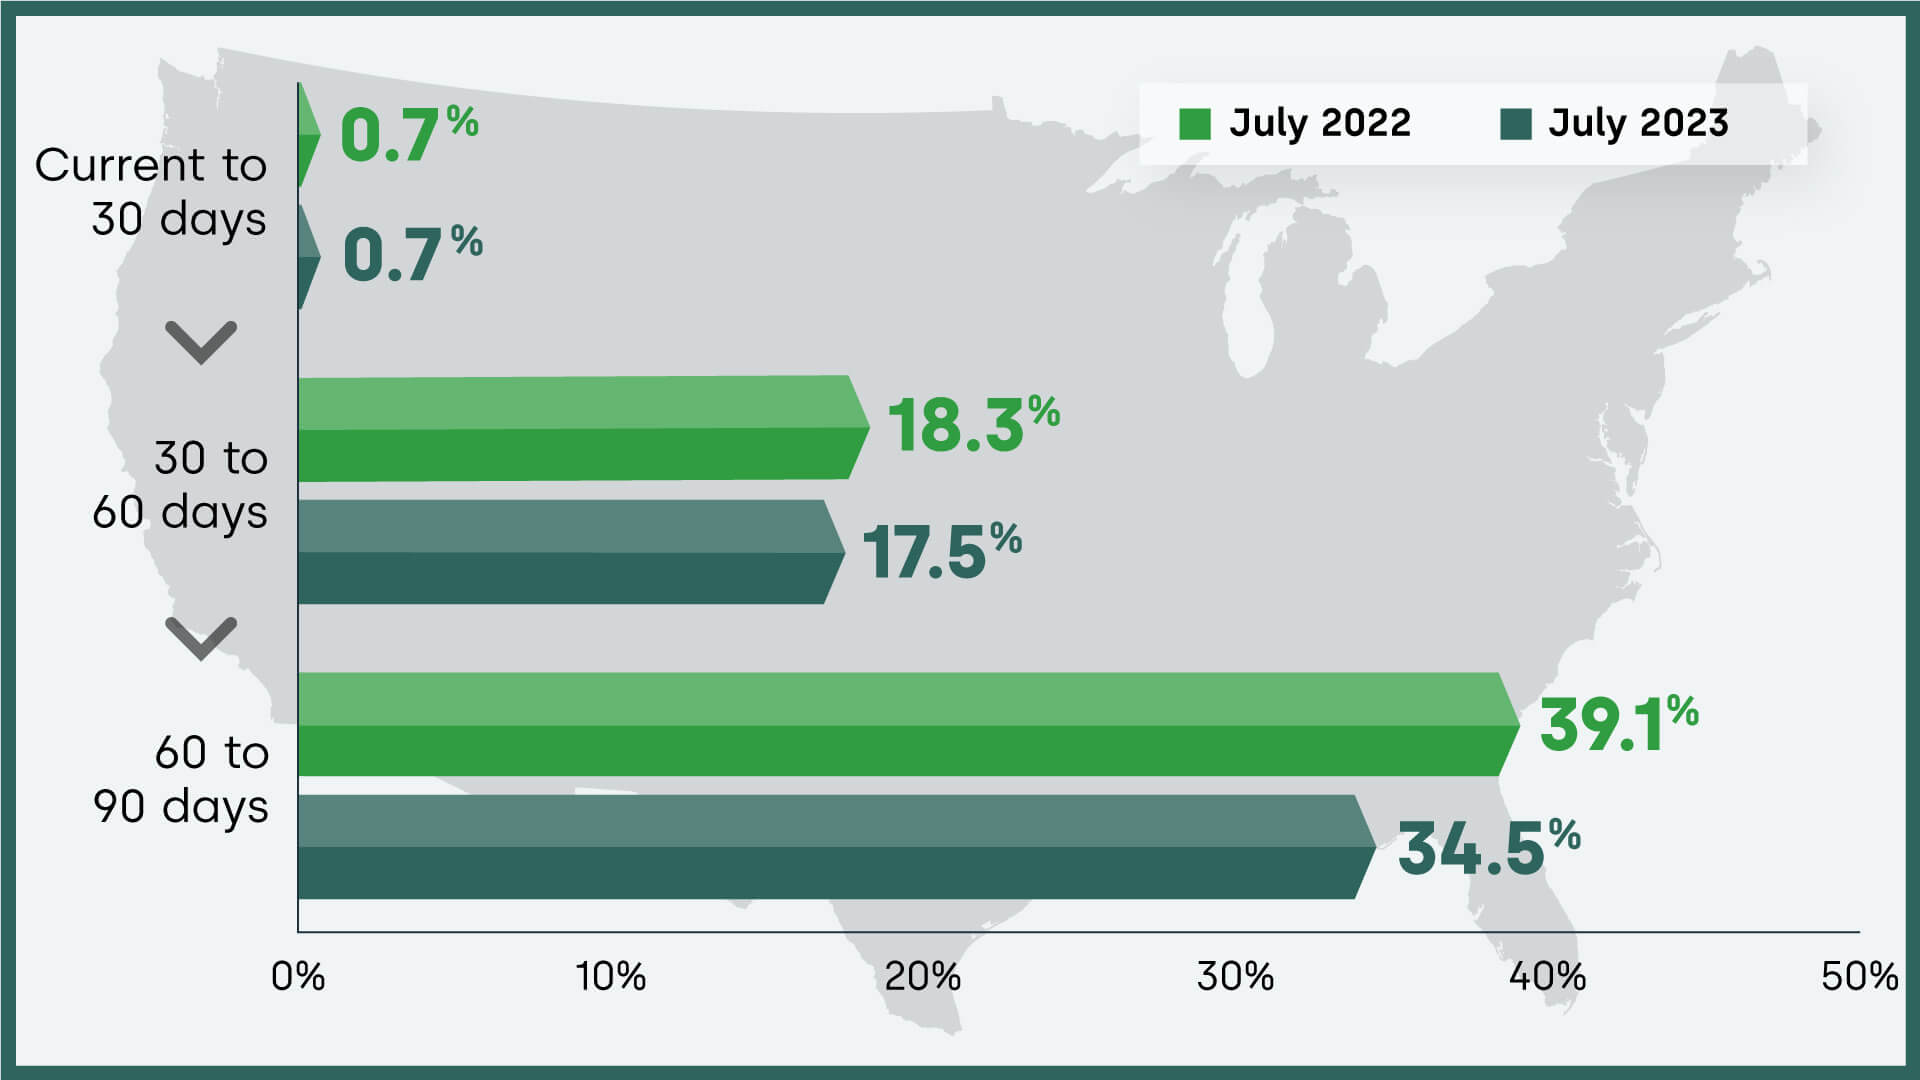 Share of delinquent mortgages transitioning from one stage to the next and year-over-year change, July 2023